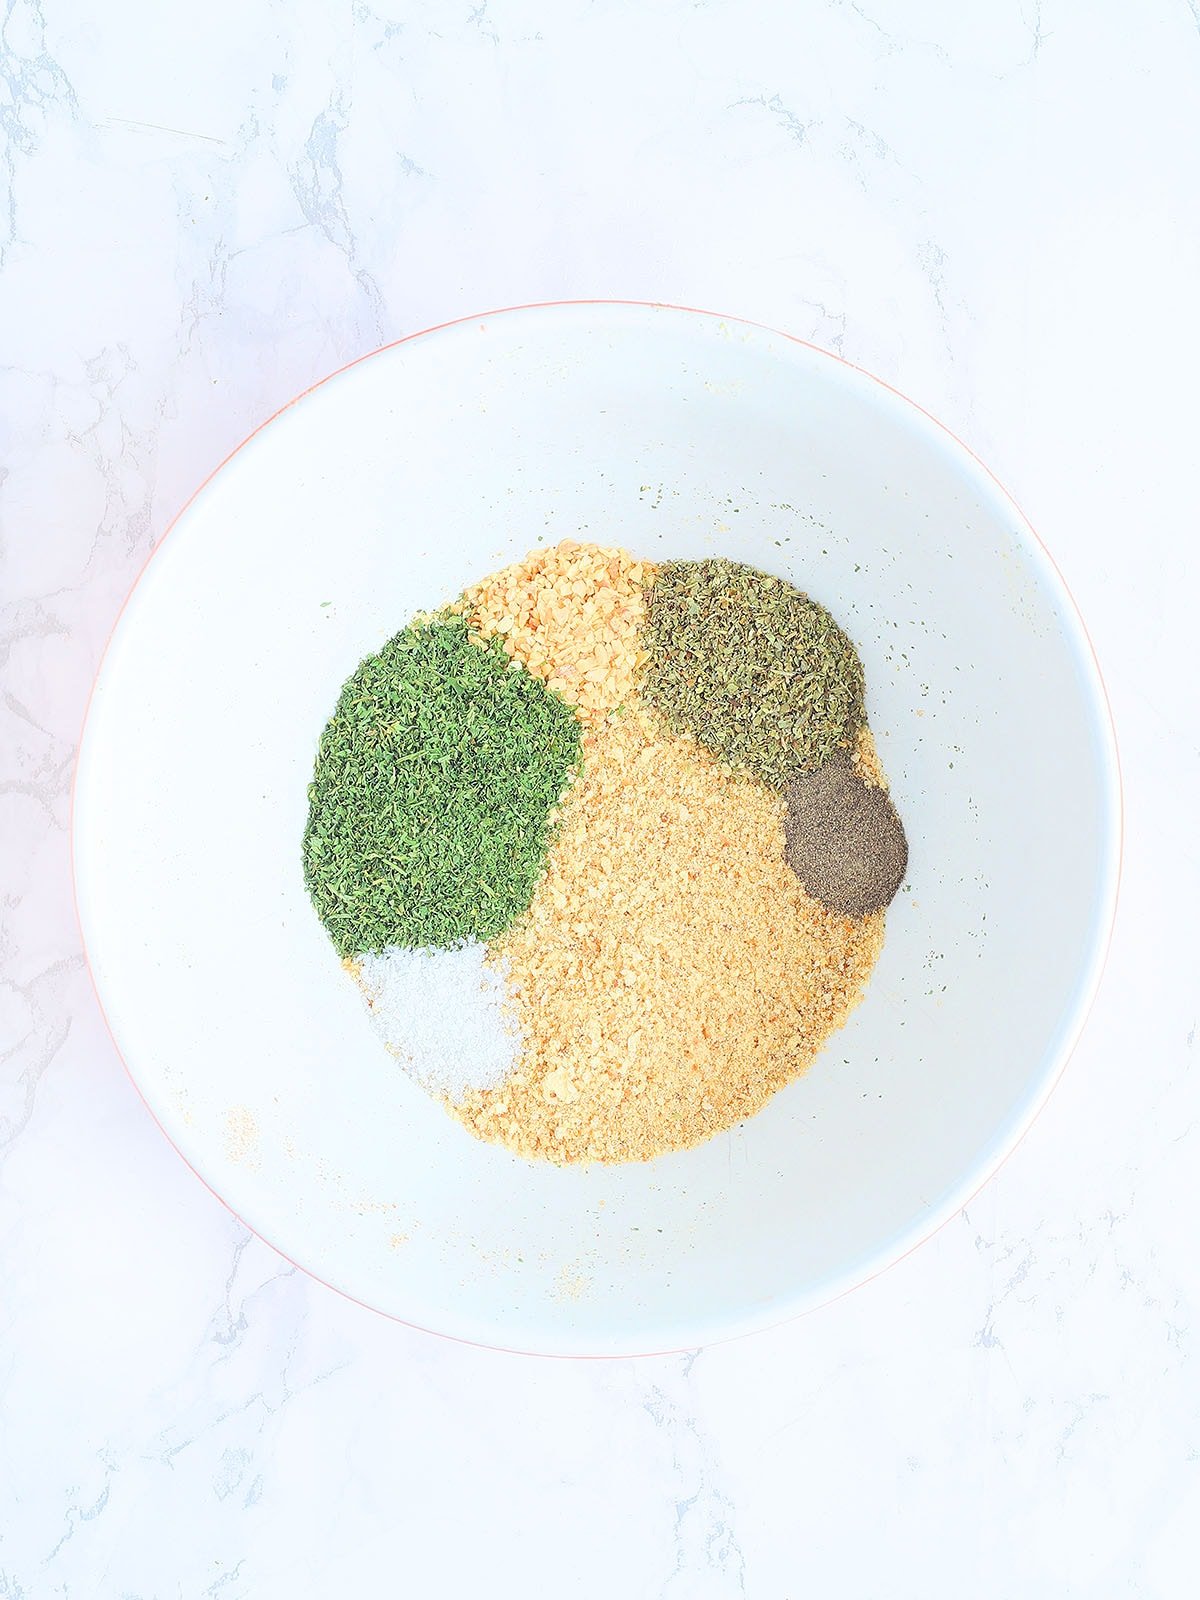 ingredients for Garlic and Herb style breadcrumbs unmixed in a white mixing bowl